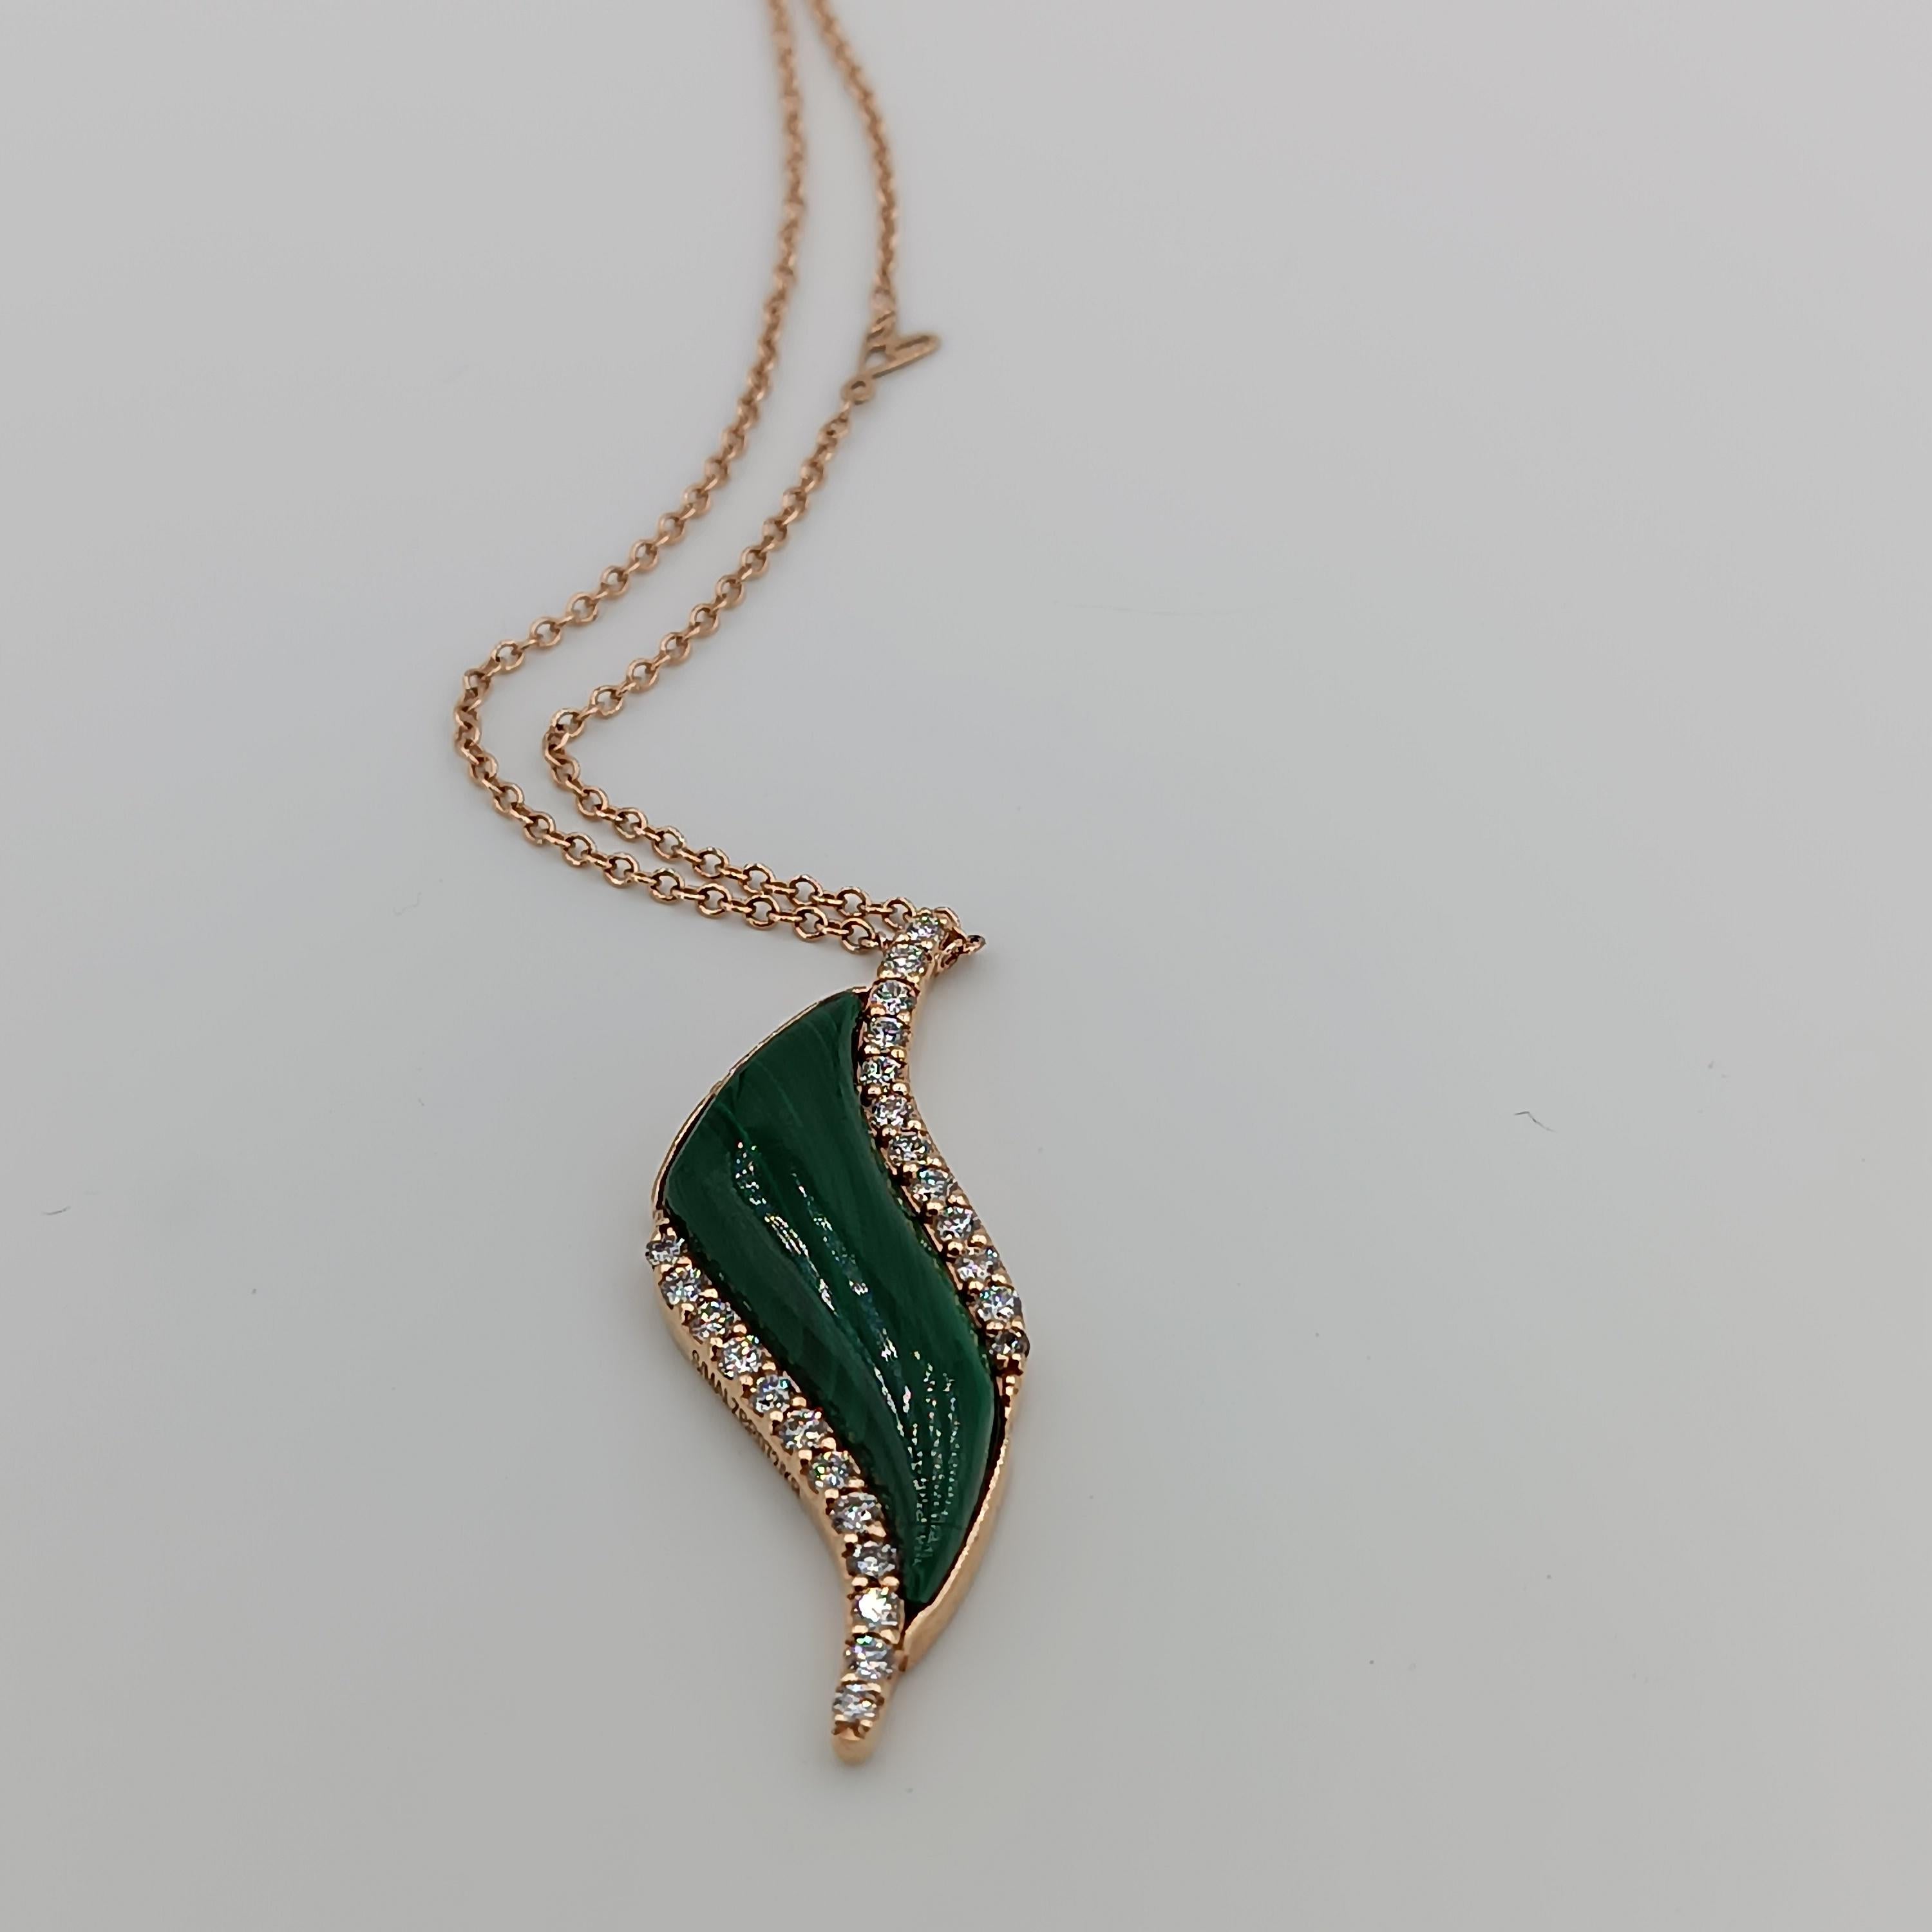 This wonderful Leo Milano pendant from our Conchetta  collection shows in every detail a very complicated yet perfectly done workmanship. The pendant and the chain are in 18 carat rose gold with malachite . The object weights 9.20 grams the total